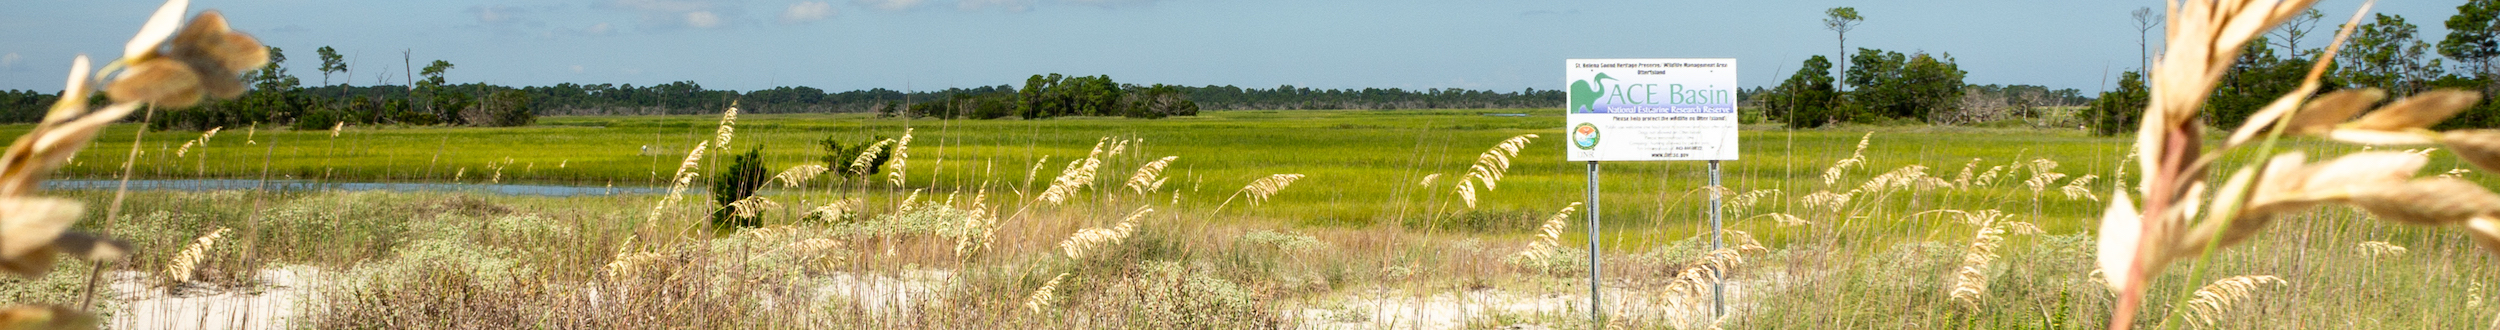 A scene of dunes and marsh on Otter Island in the ACE Basin